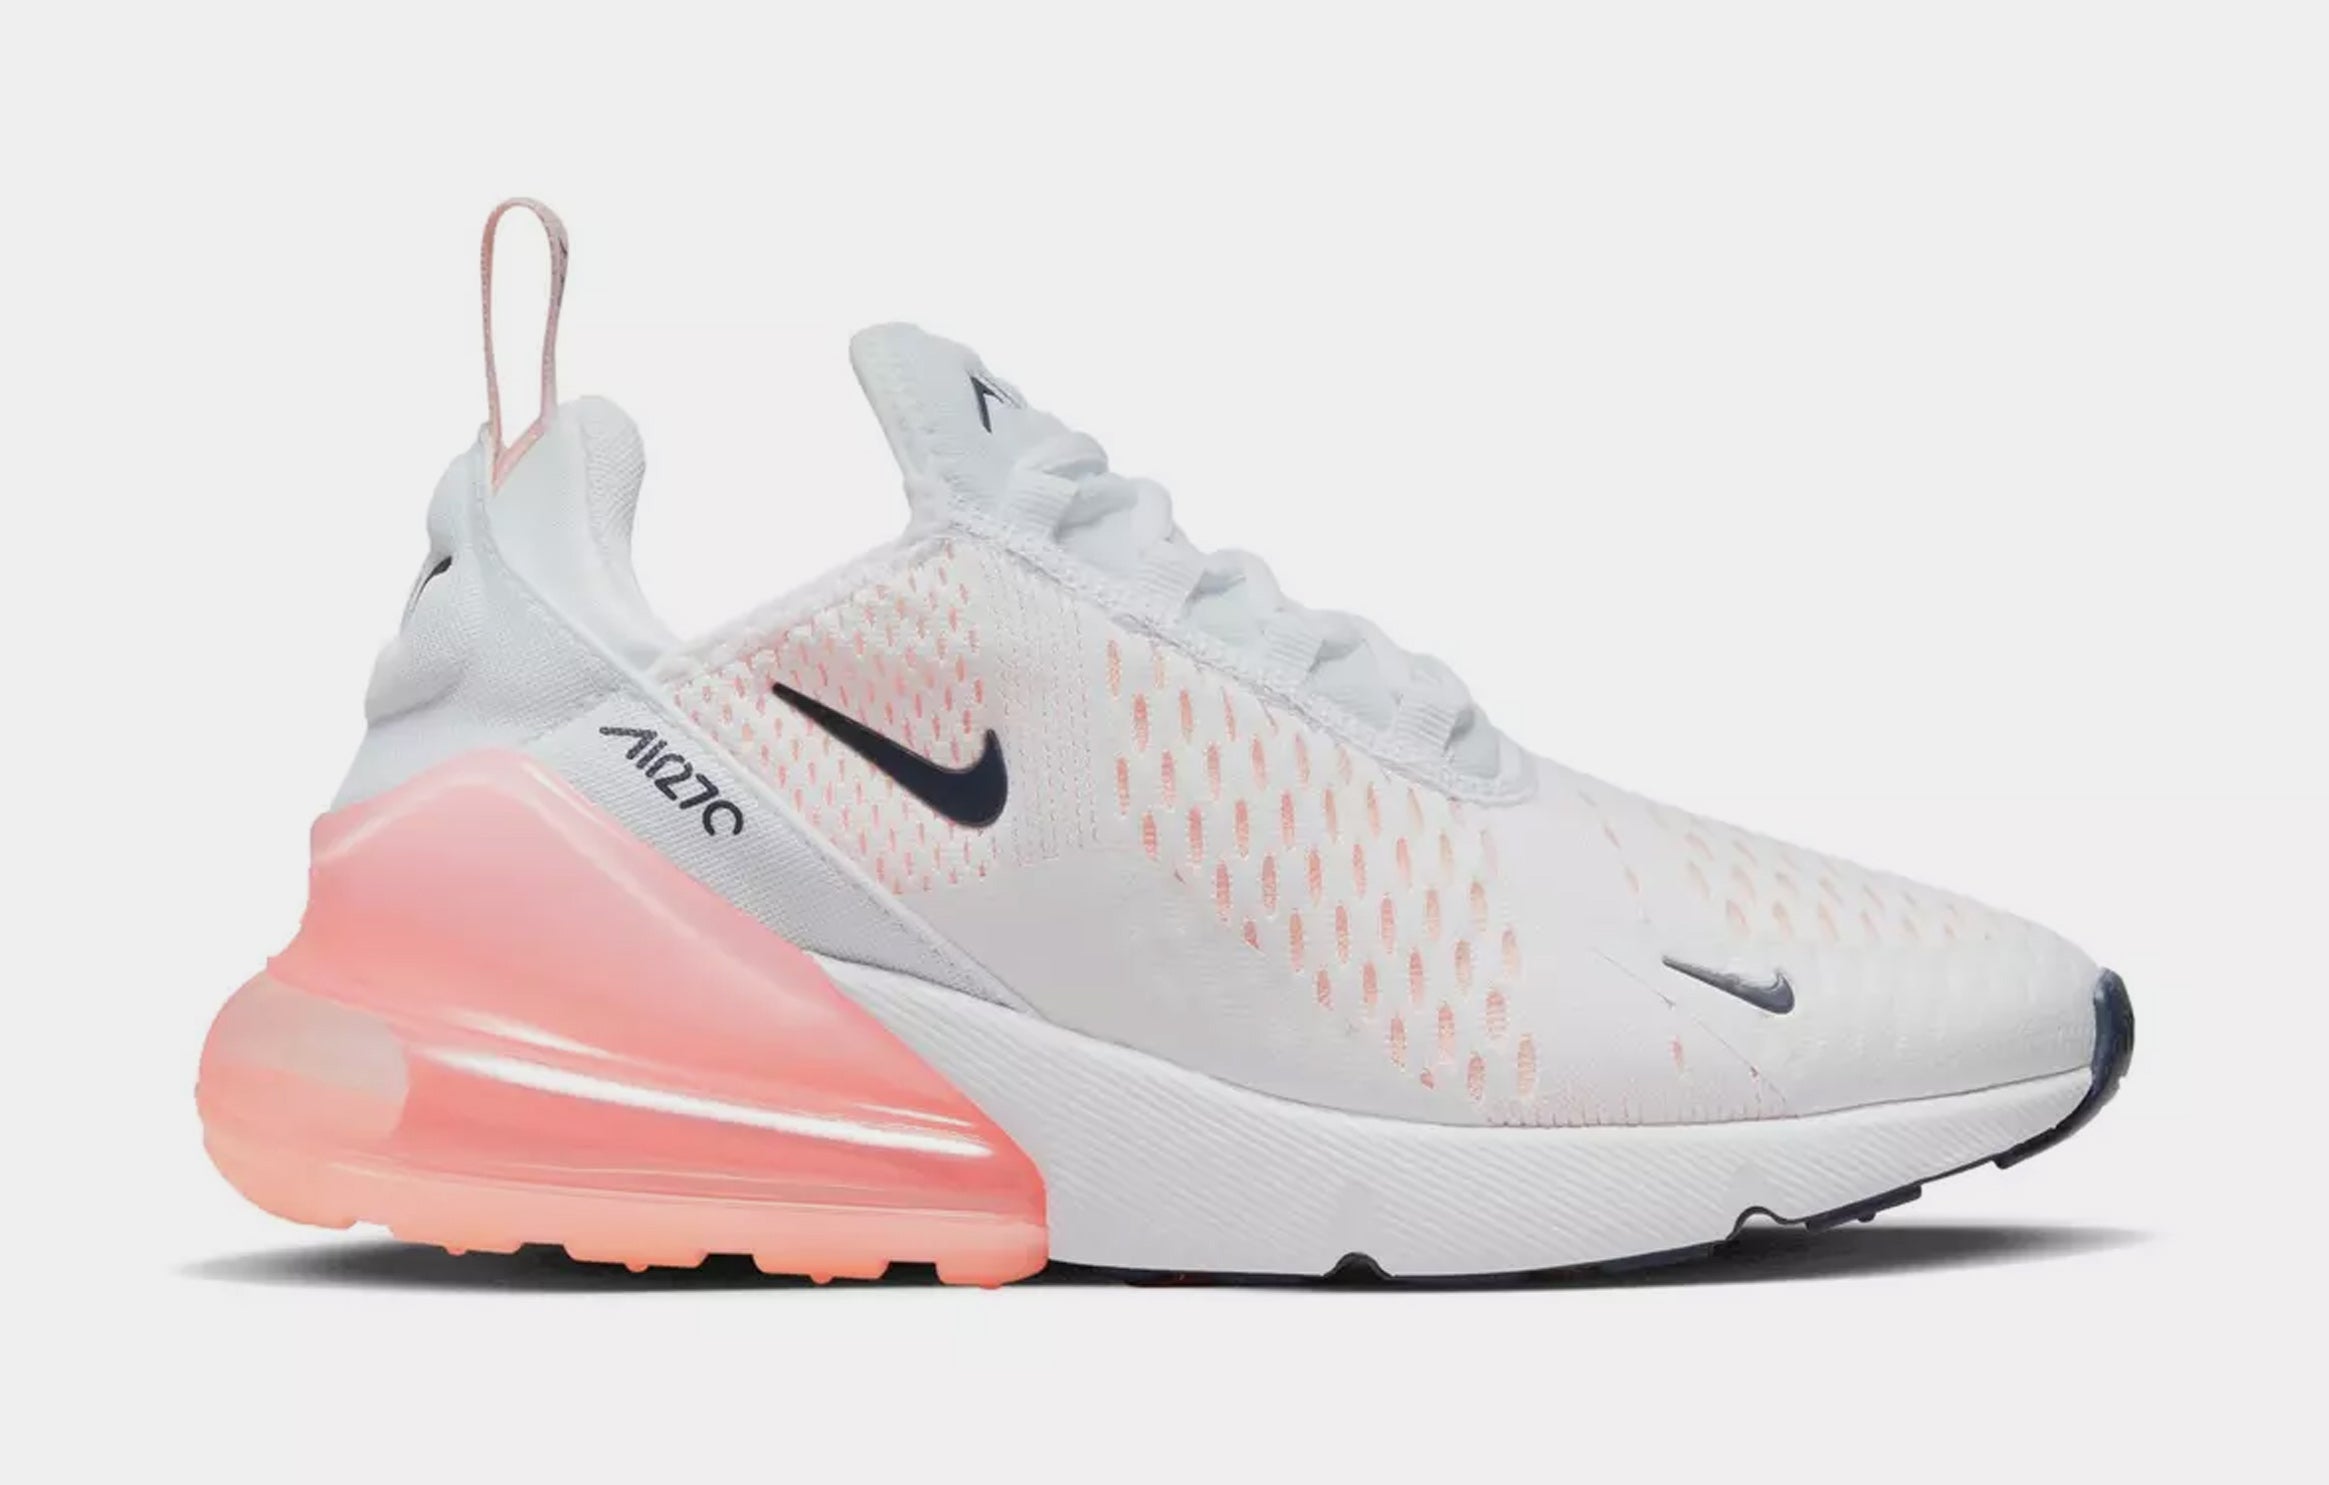 Nike Max 270 Womens Lifestyle Shoes White Pink AH6789-110 – Shoe Palace